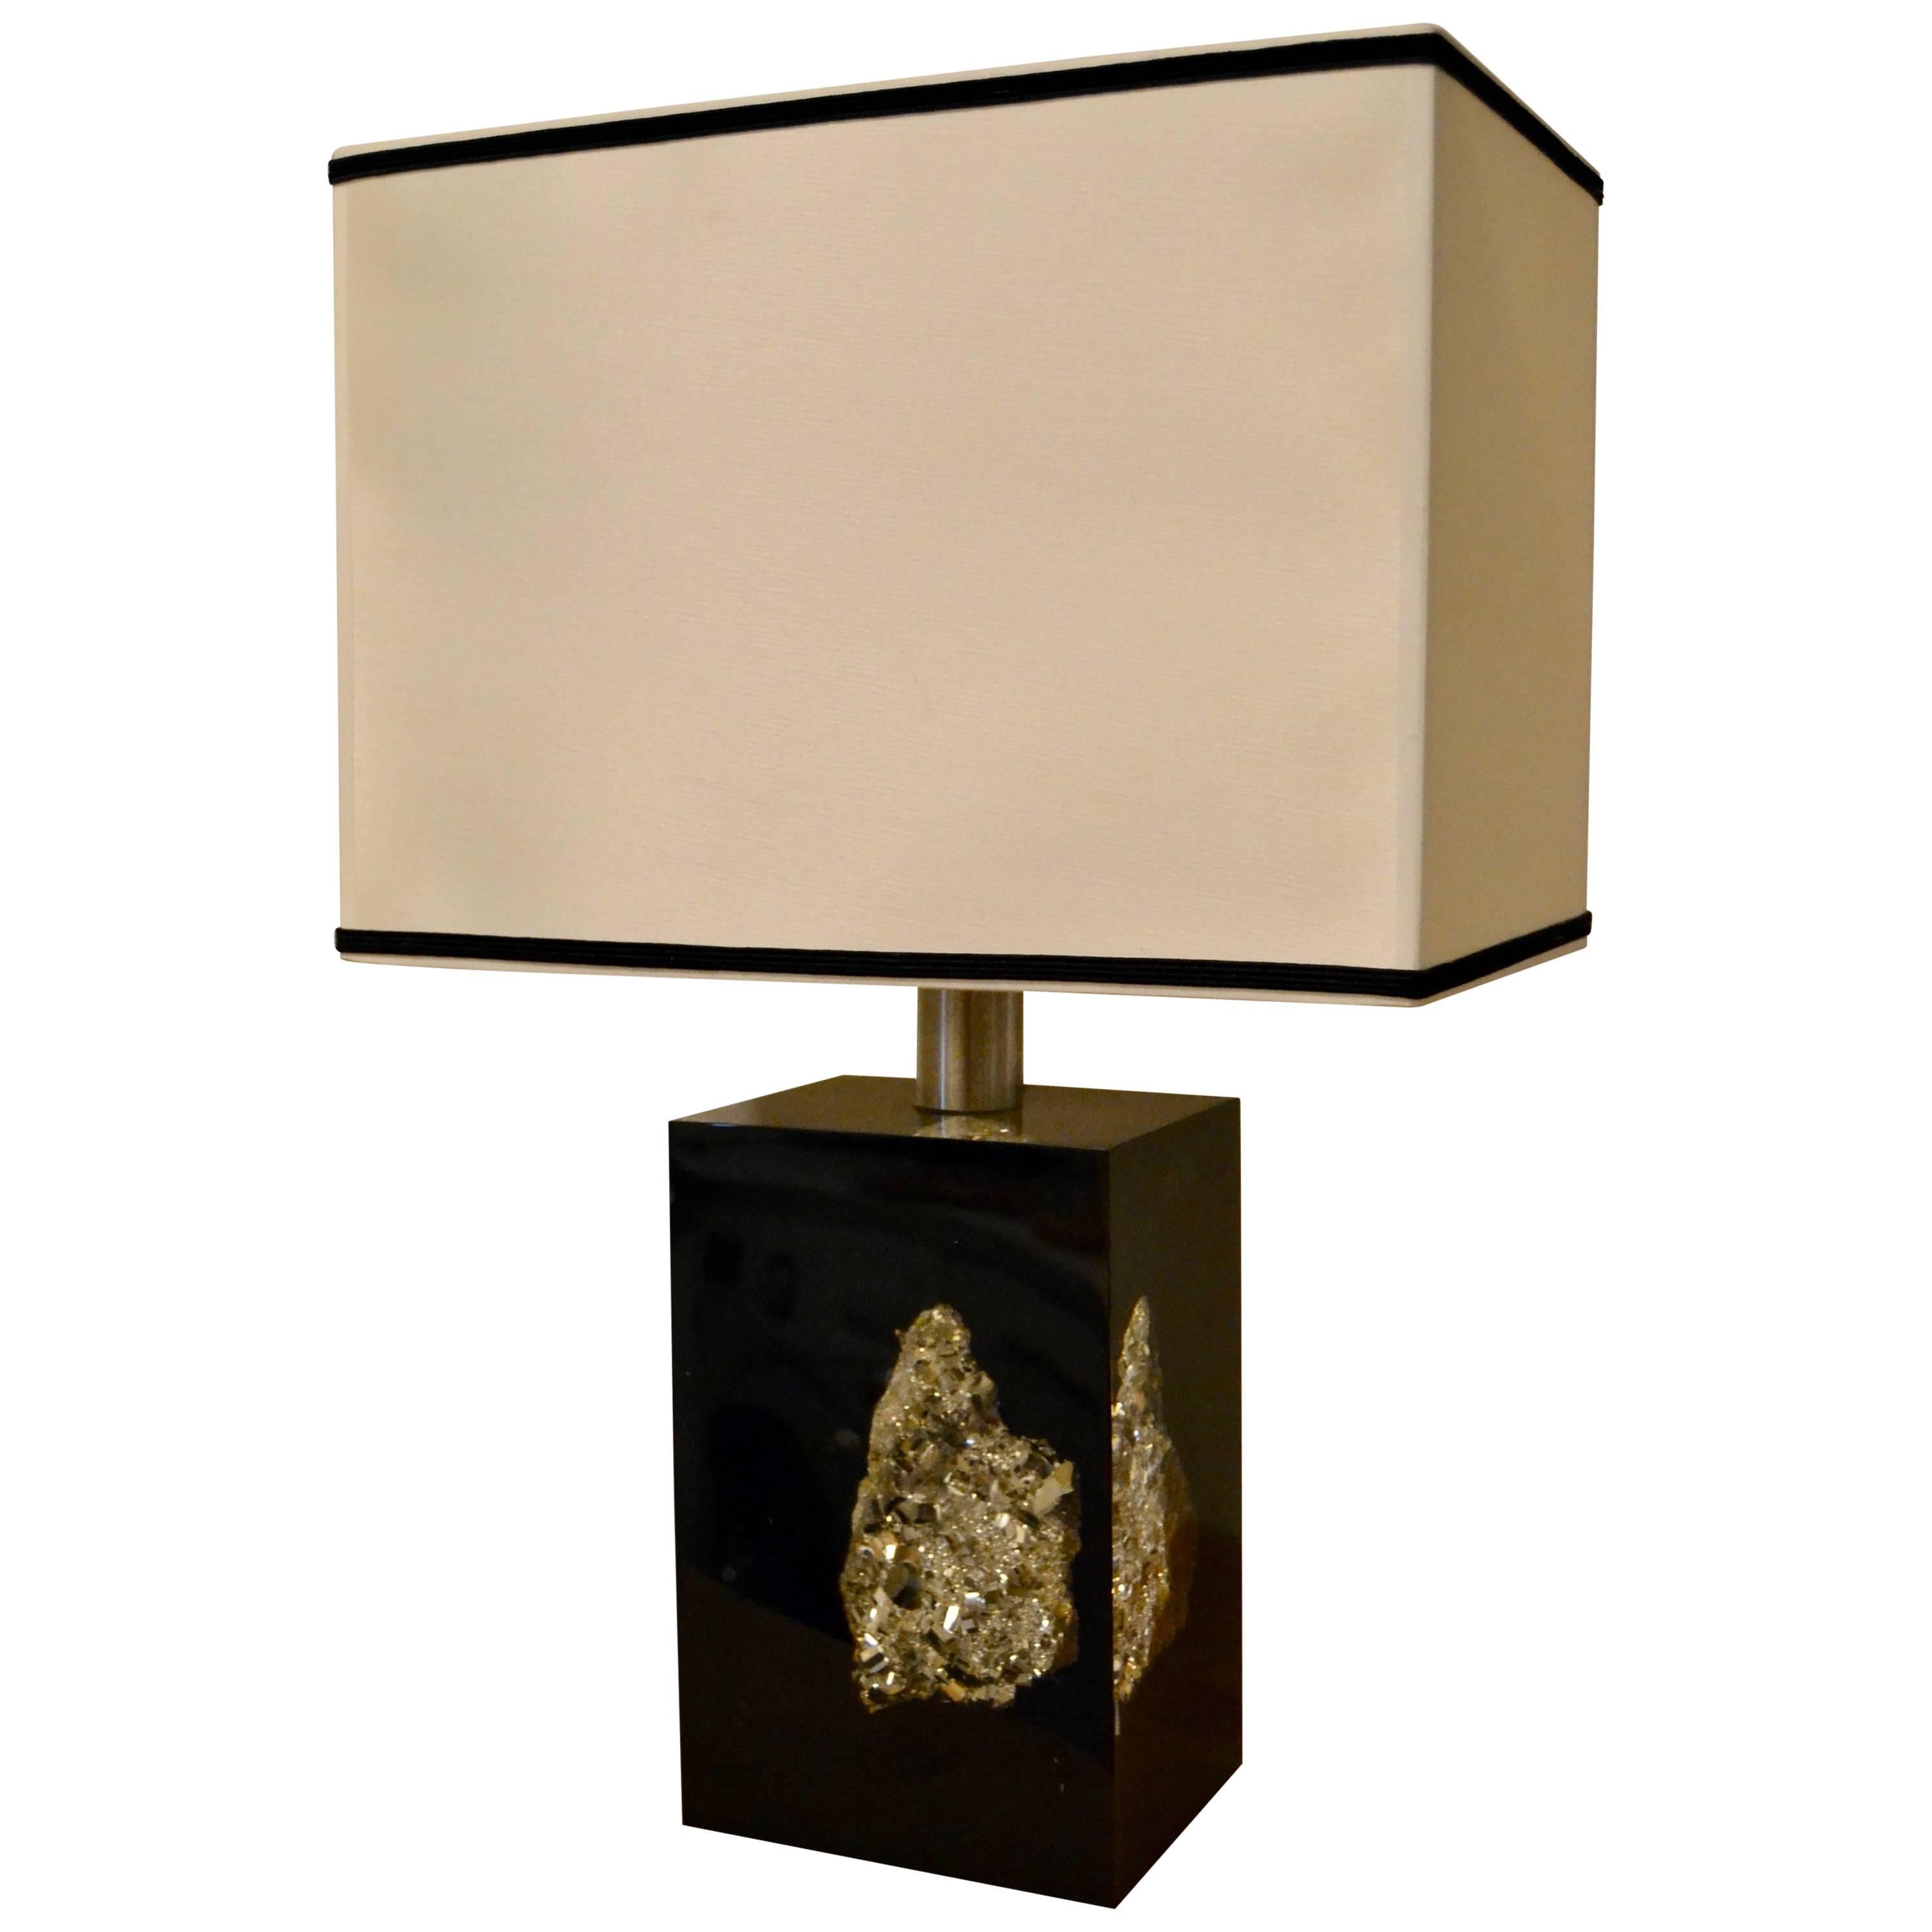 1970s Pyrite Rock Inlaid on Lucite Table Lamp